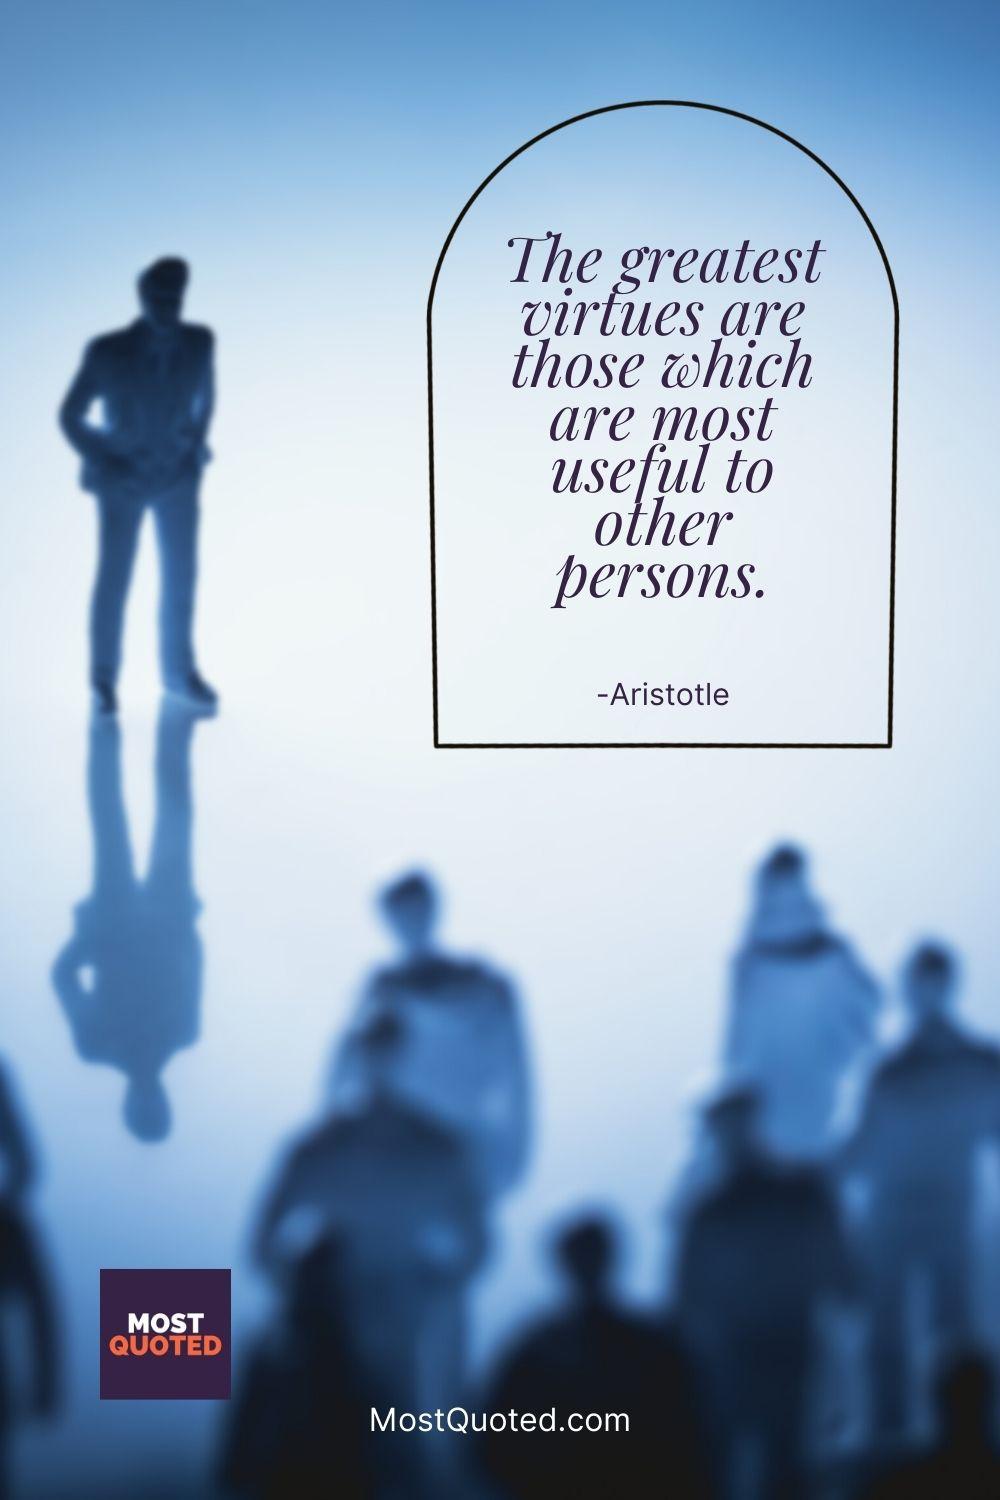 The greatest virtues are those which are most useful to other persons. - Aristotle